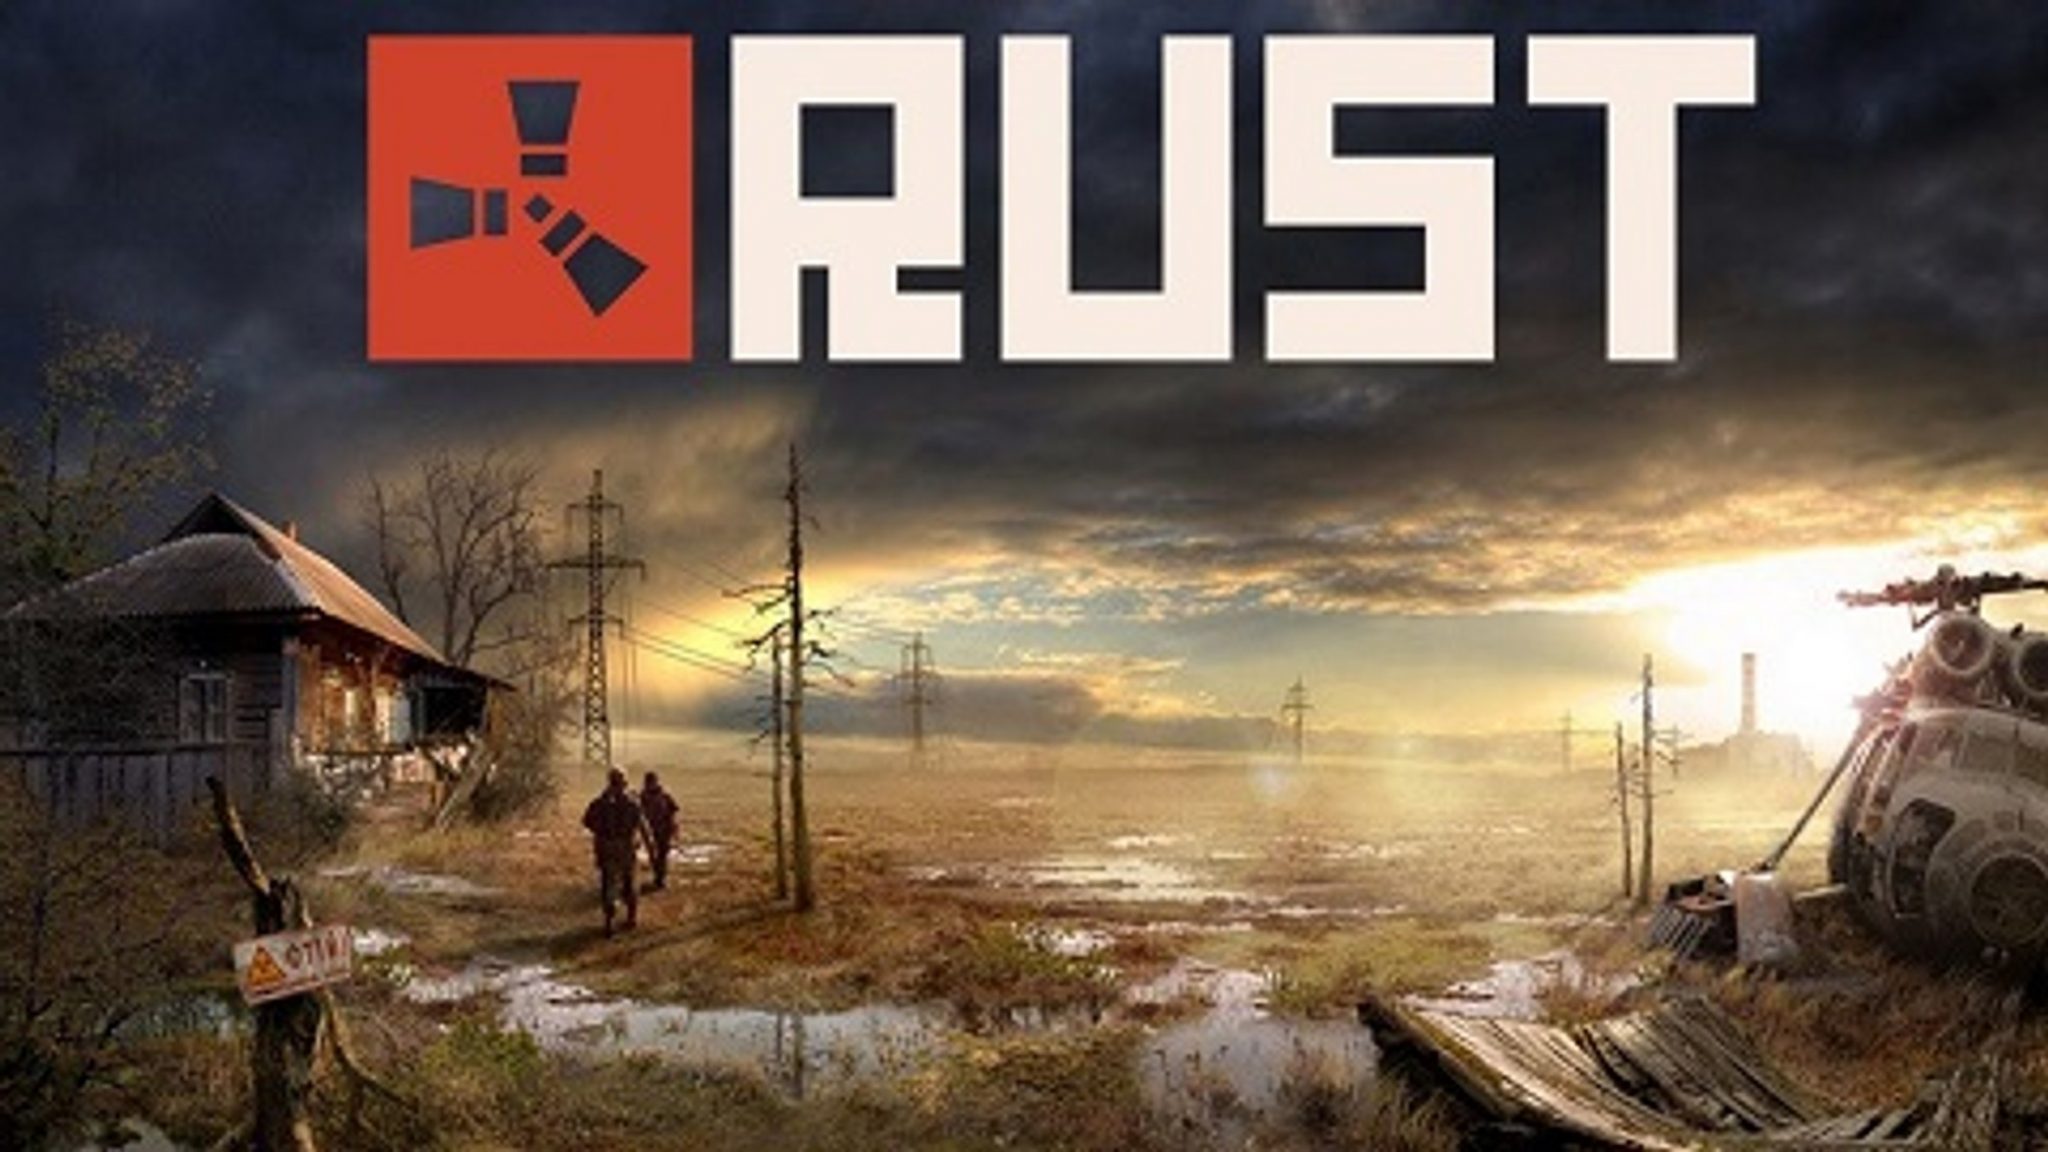 age of rust download